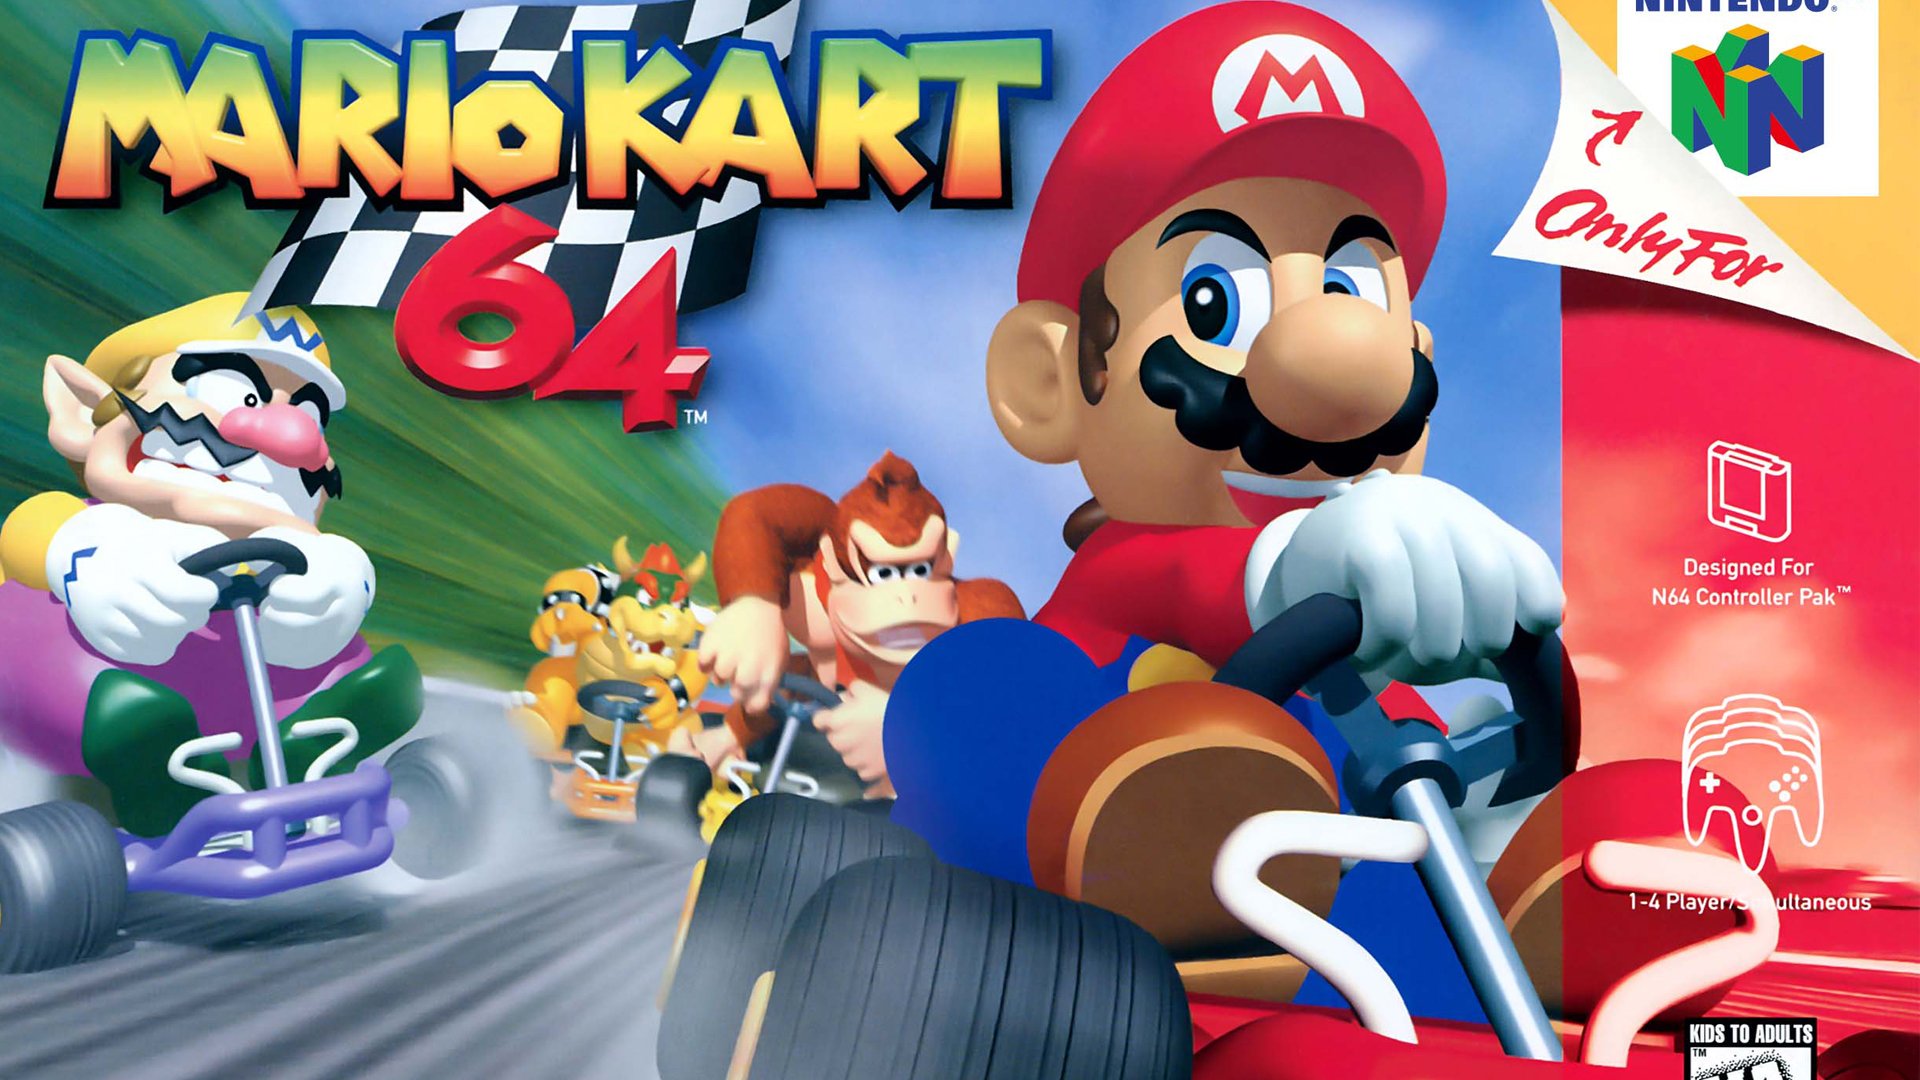 Mario Kart 64 coming to Switch via Online Expansion Pack subscription